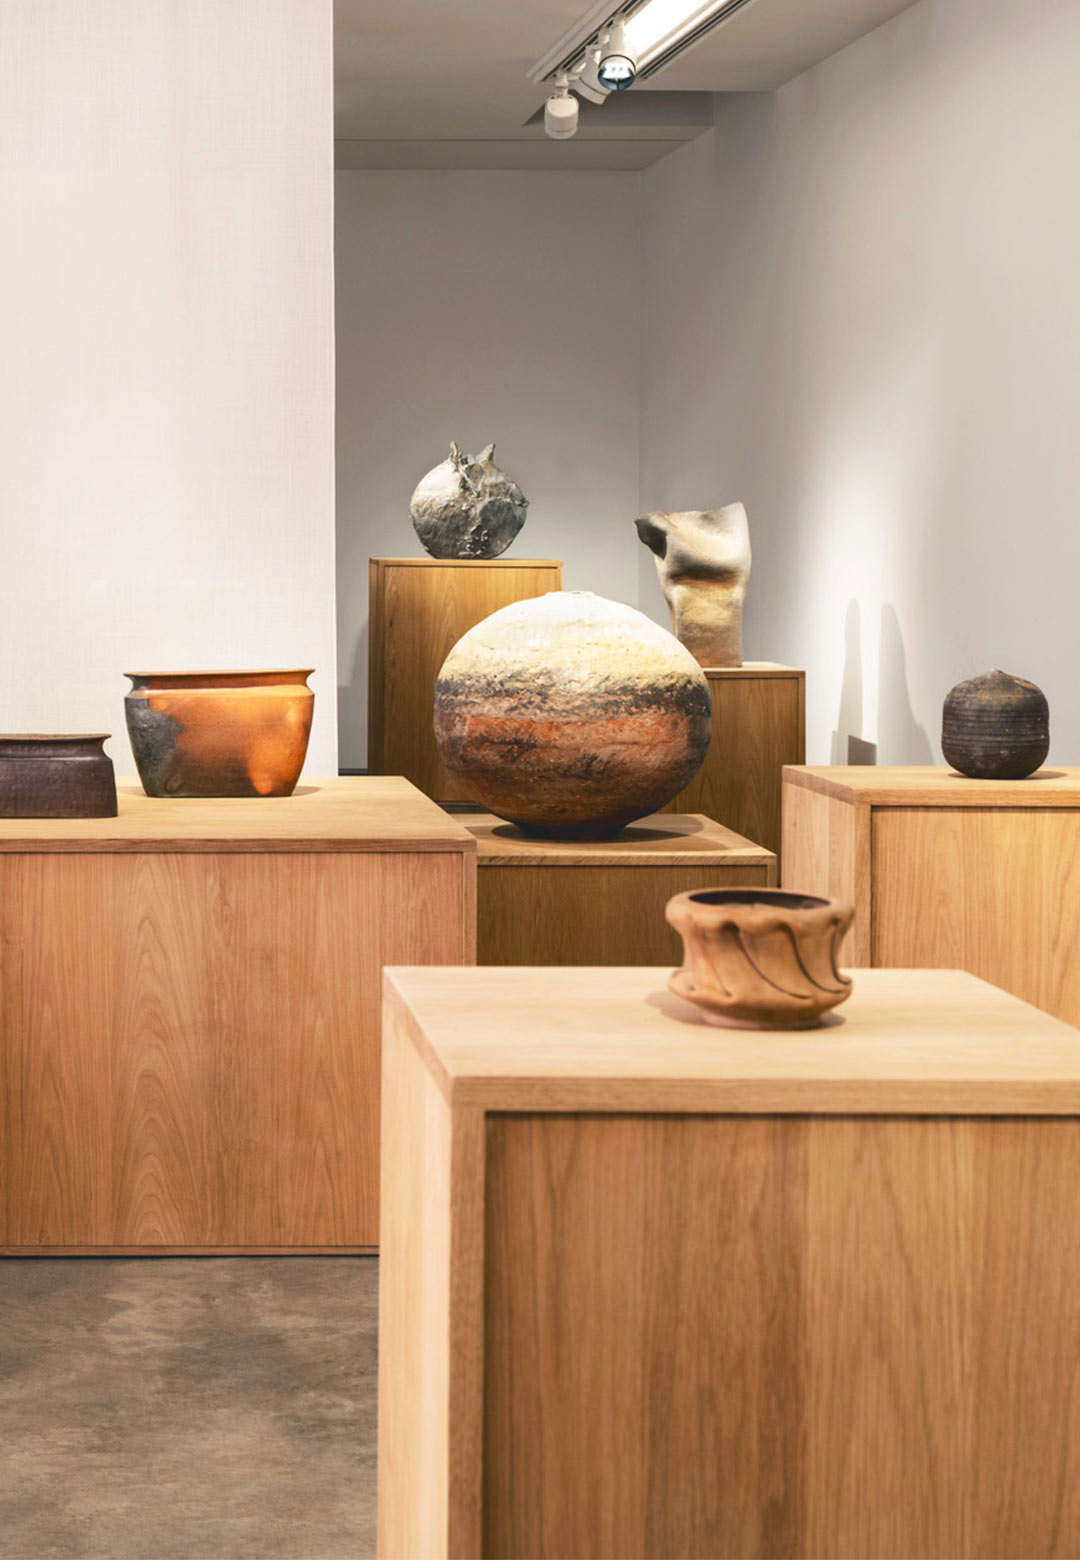 ‘Earth and Accident’ fuses tradition and innovation in contemporary ceramics